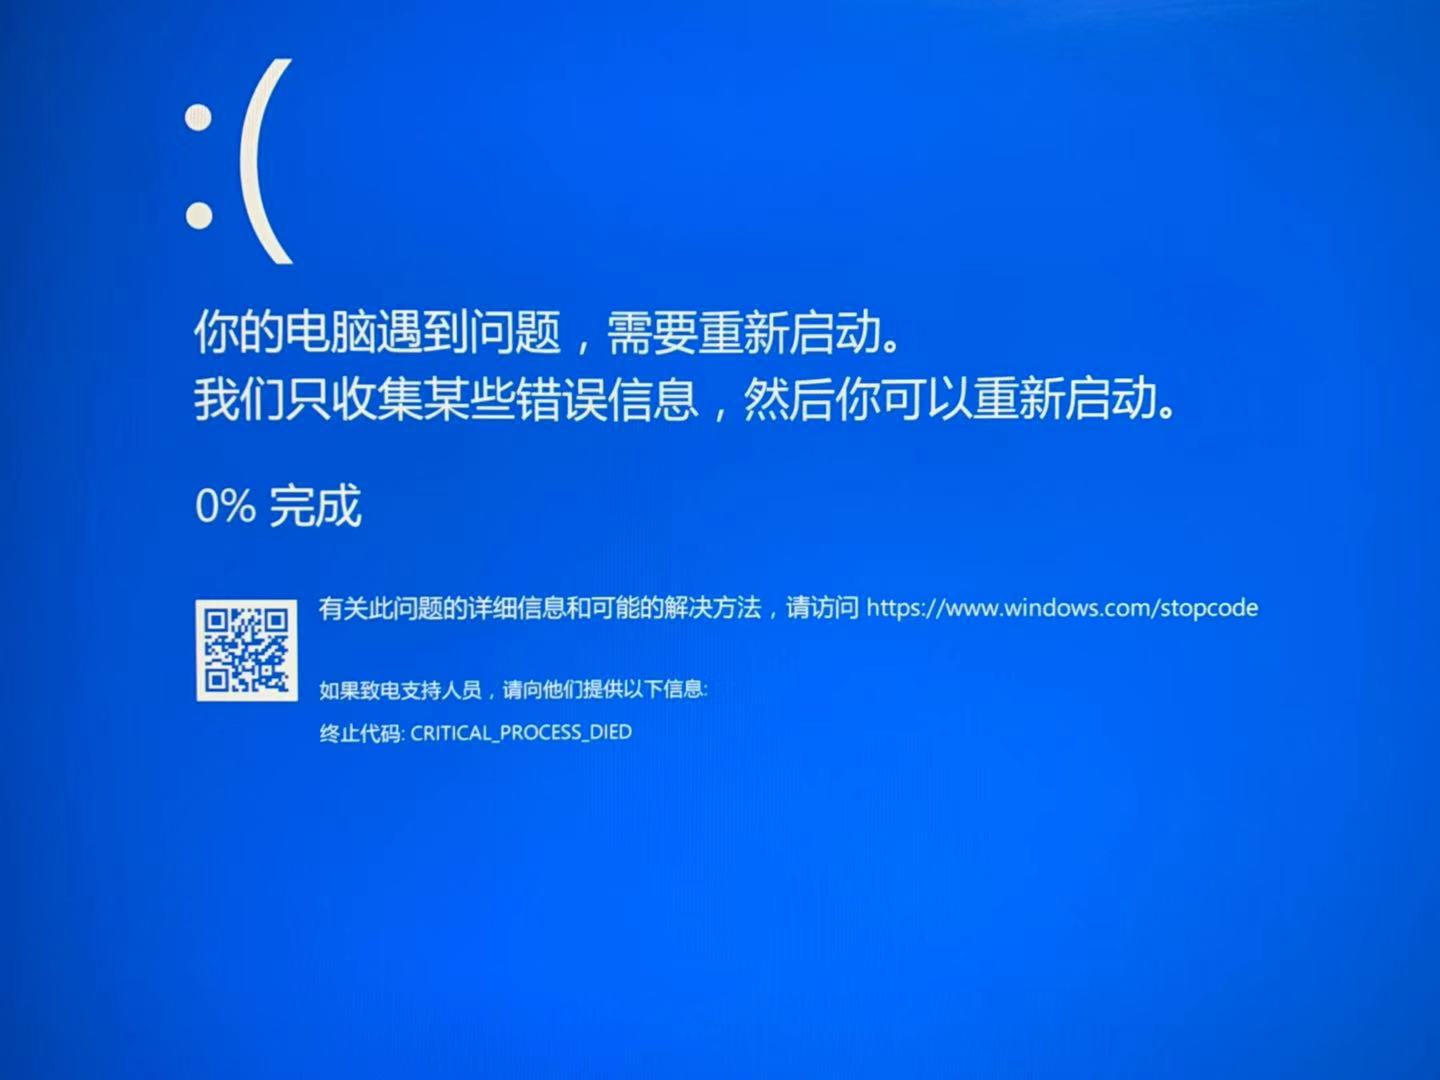 Blue Screen that might caused by intel SSD